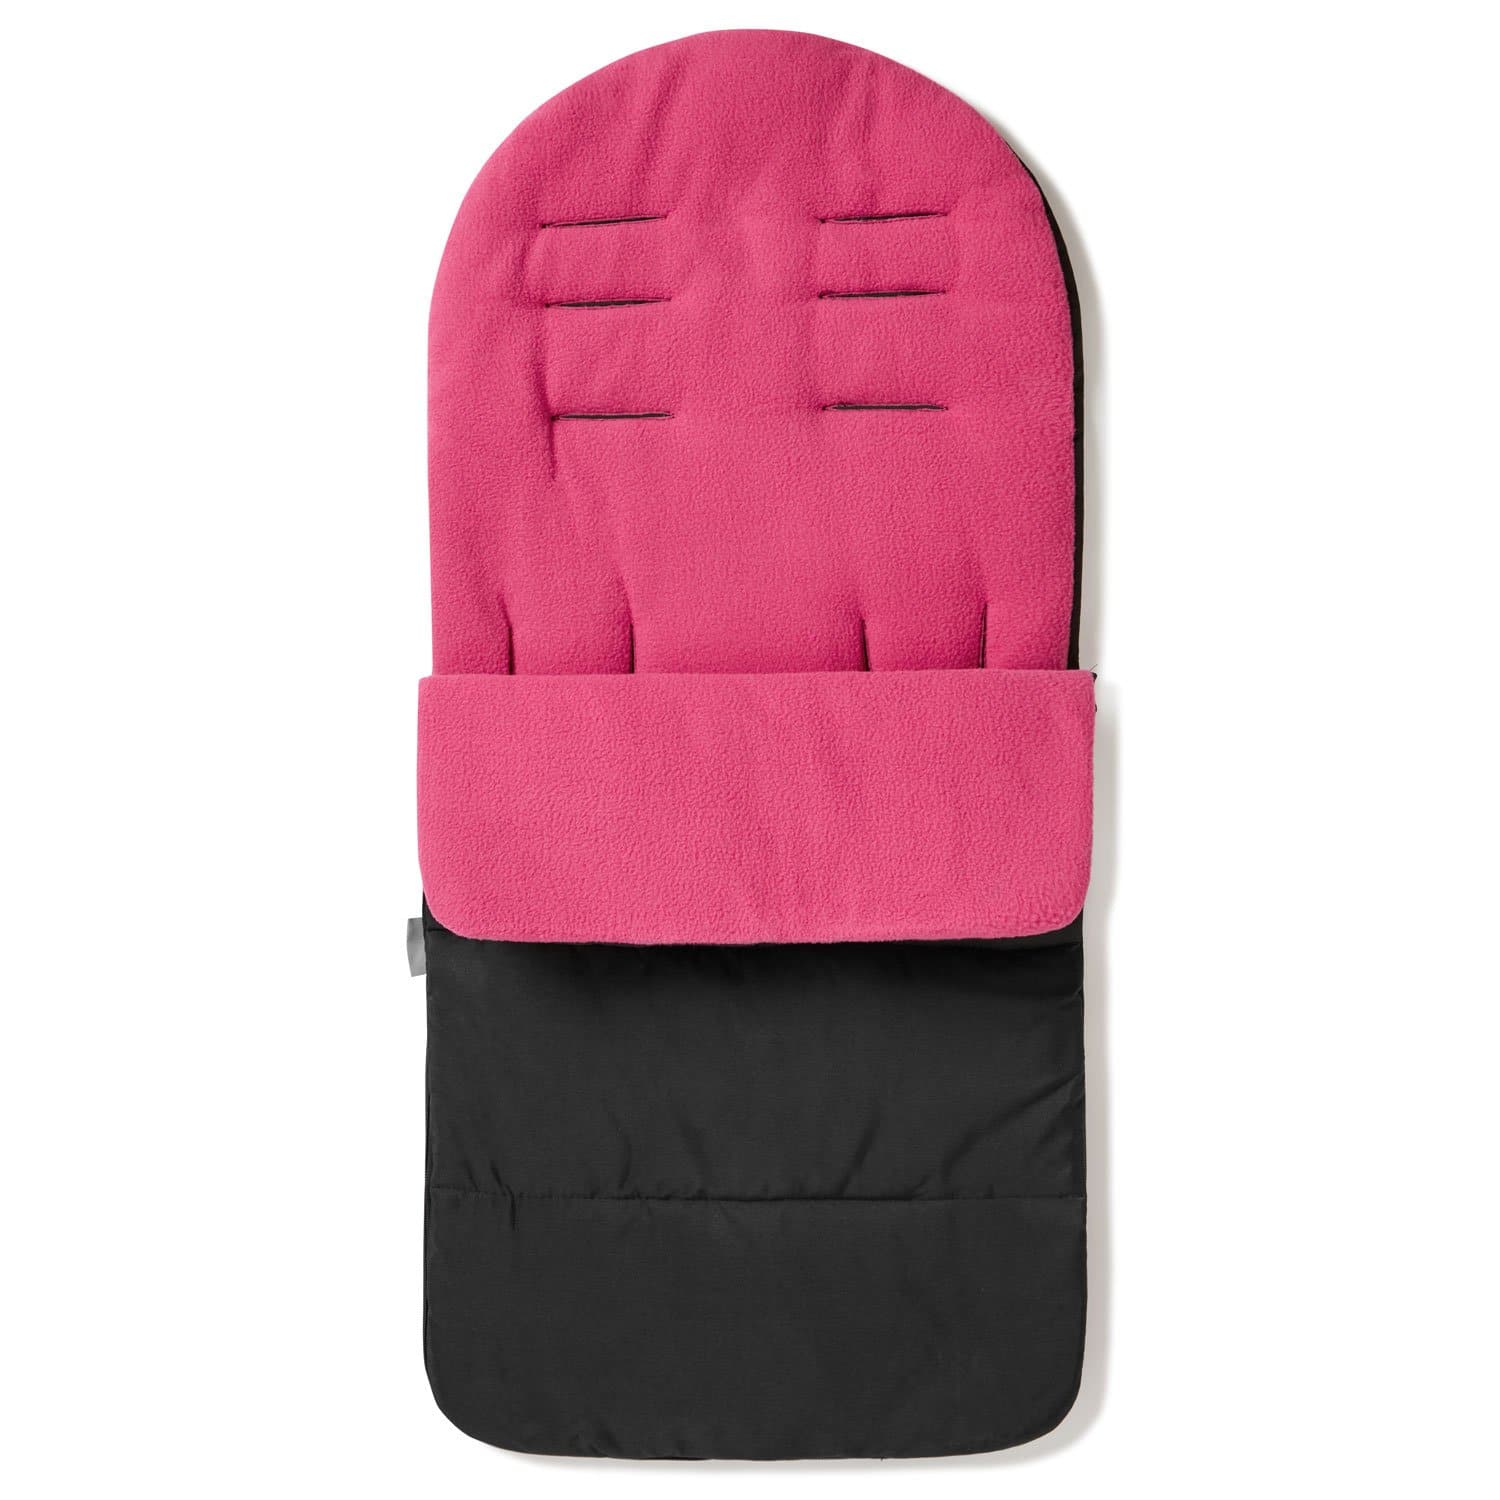 Premium Footmuff / Cosy Toes Compatible with BabyCare - Pink Rose / Fits All Models | For Your Little One